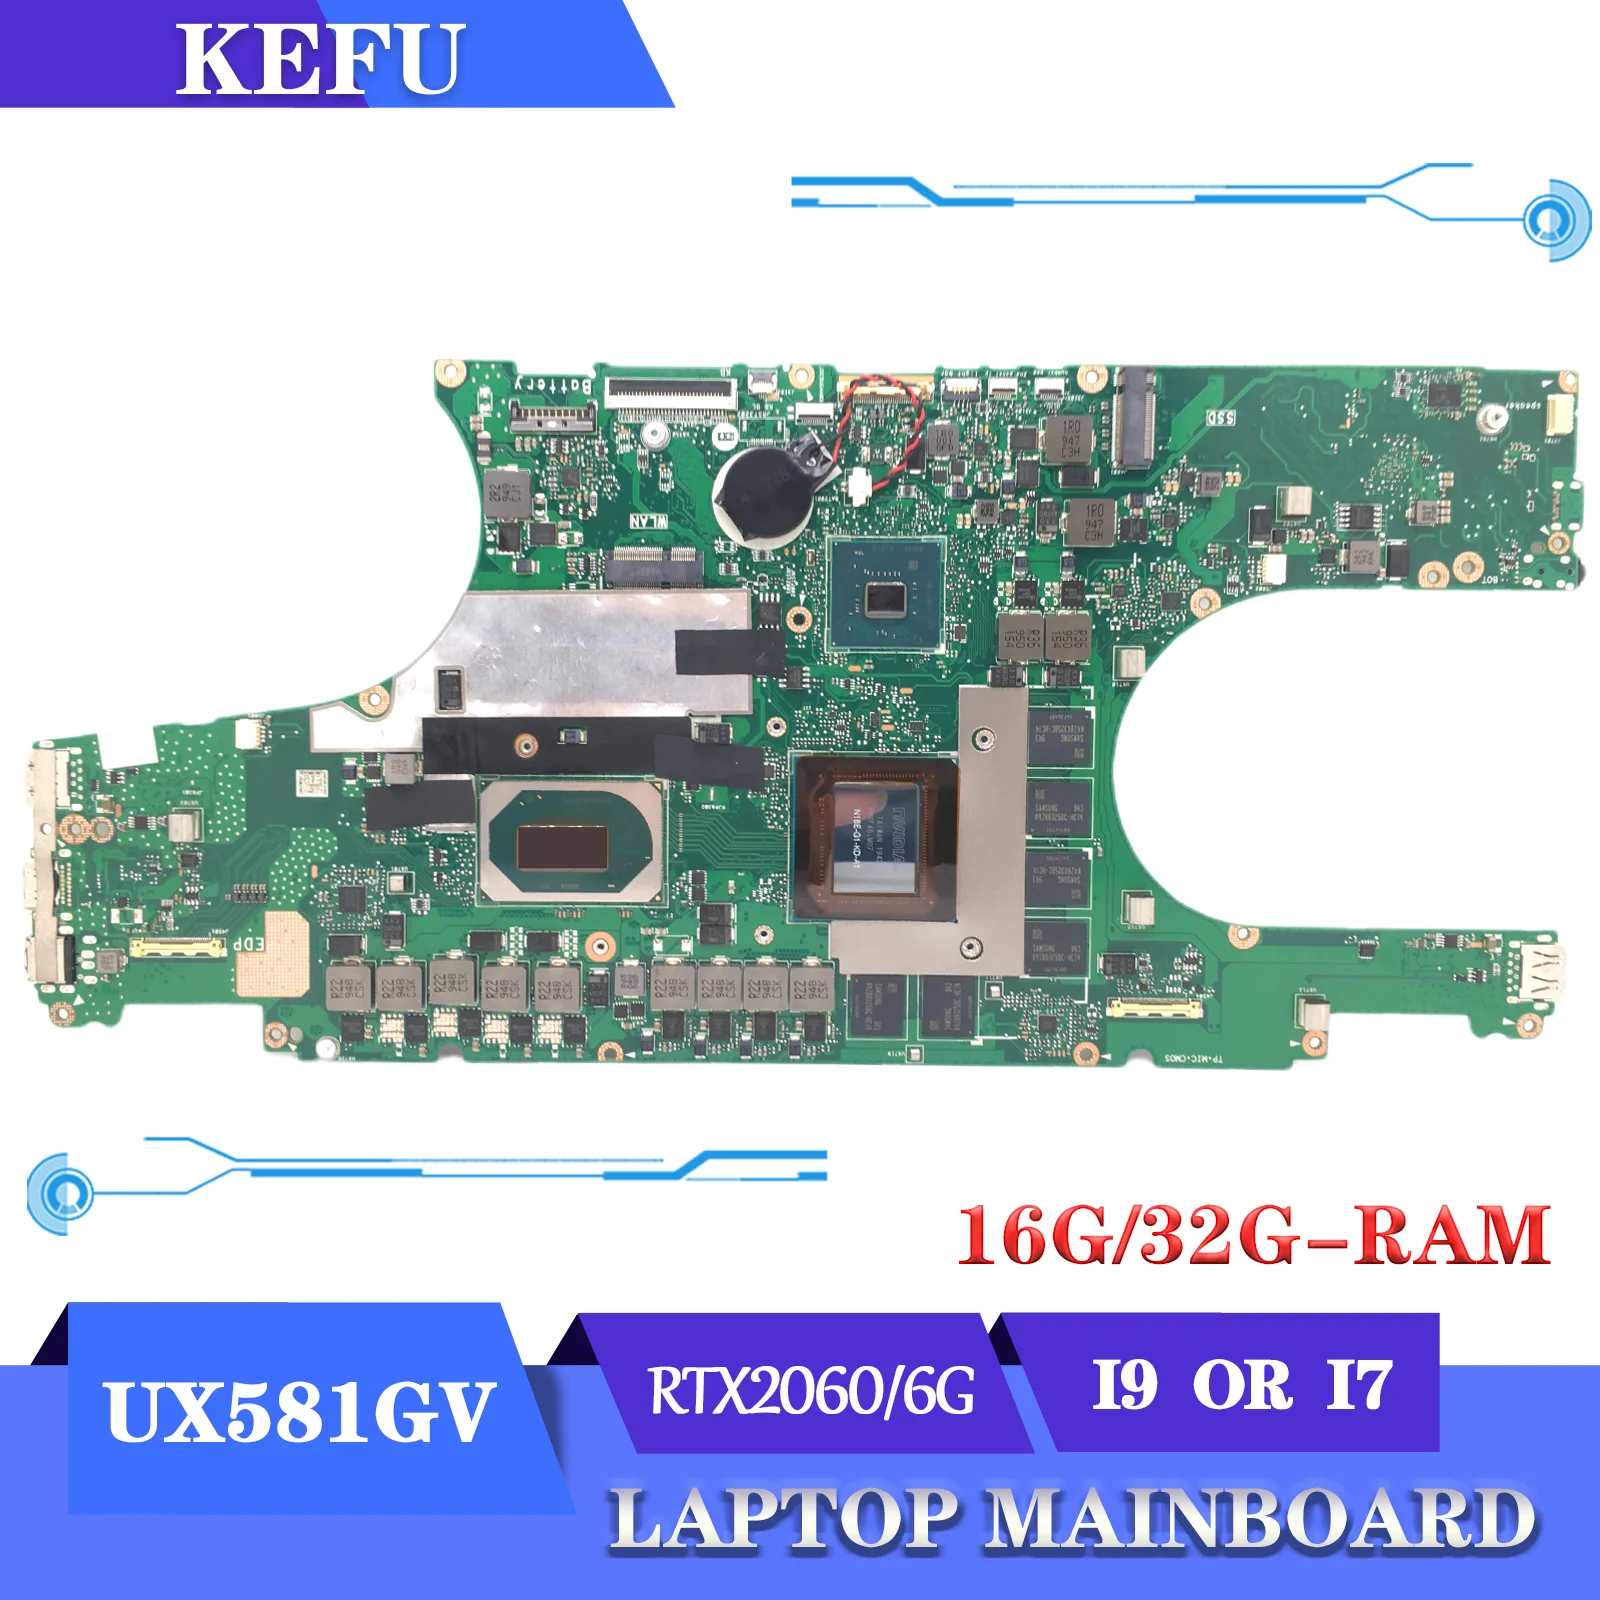 

KEFU New UX581G Mainboard For ASUS Zenbook Pro Duo UX581 UX581GV Laptop Motherboard I7-9750H I9-9980HK RTX2060/6G 16G/32G-RAM